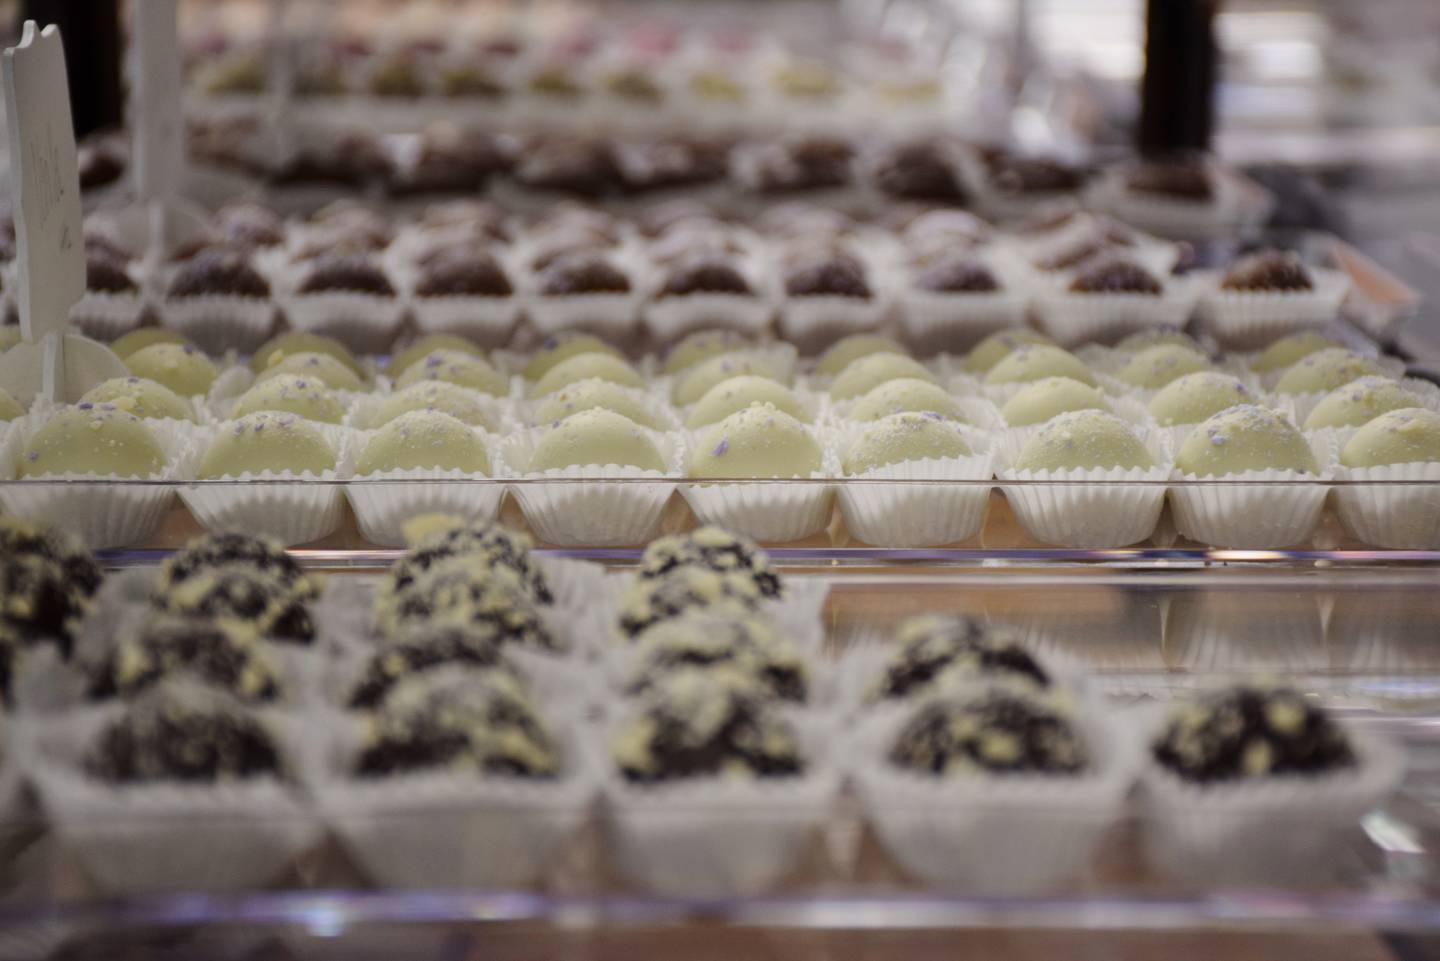 Sweet-DeLights, located at 113 W. Main St., Unit A, in Genoa, opened Saturday, May 14, 2022. Truffles can be purchased in white, milk and dark chocolates, and flavors include vanilla, chocolate, maple, pecan, key lime and banana.